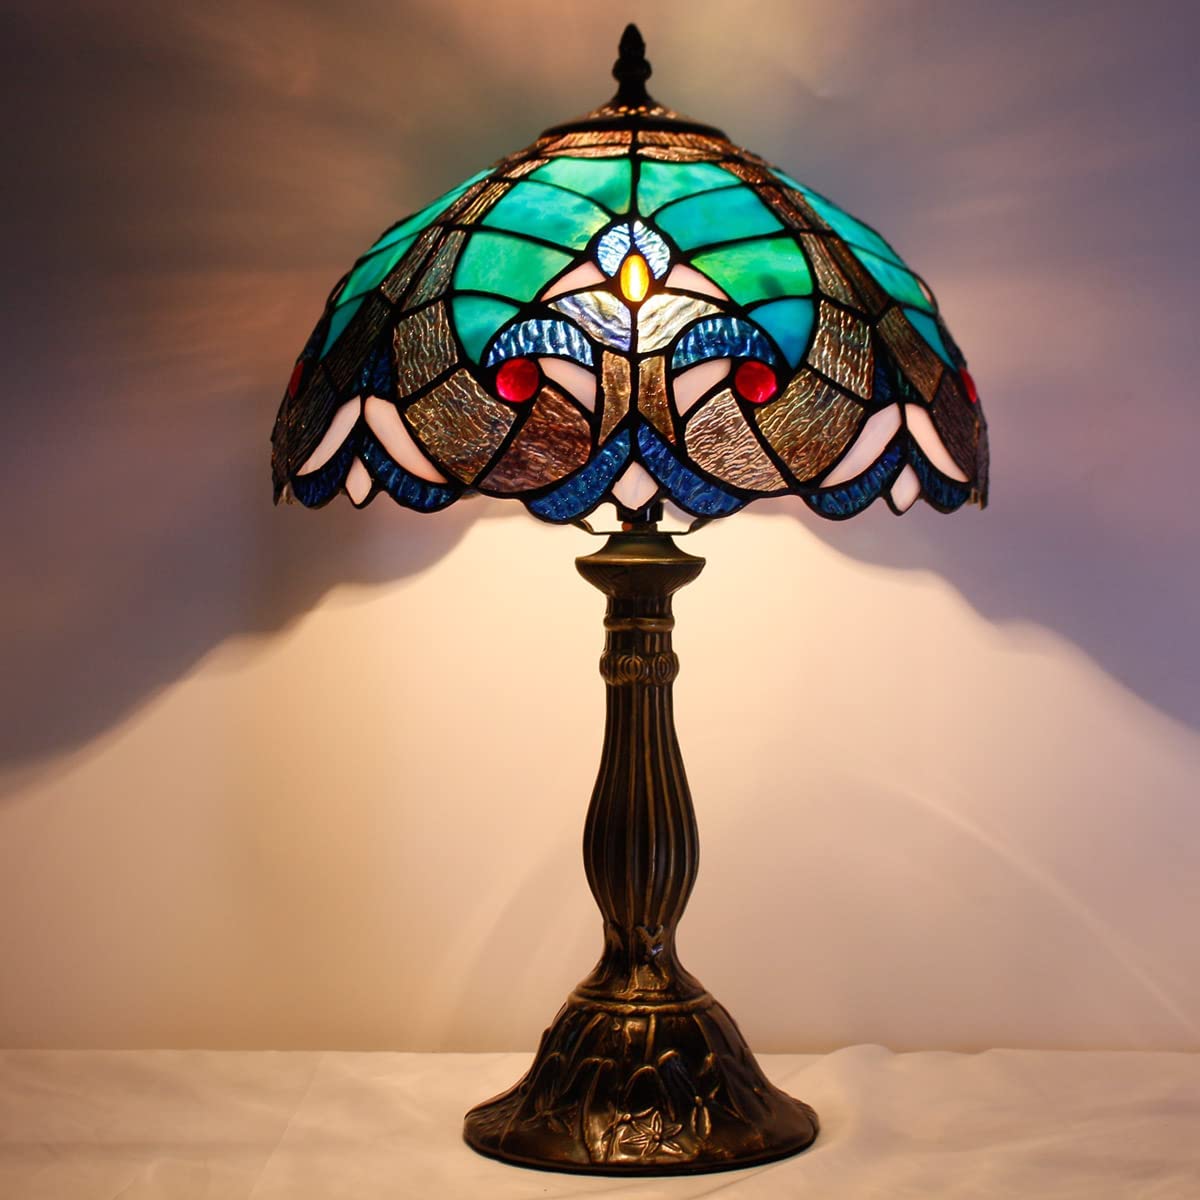 SHADY  Style Lamp Green Liaison Stained Glass Bedside Table Lamp Reading Desk Light 12X12X18 Inches Decor Nightstand Bedroom Living Room Home Office S160G Series